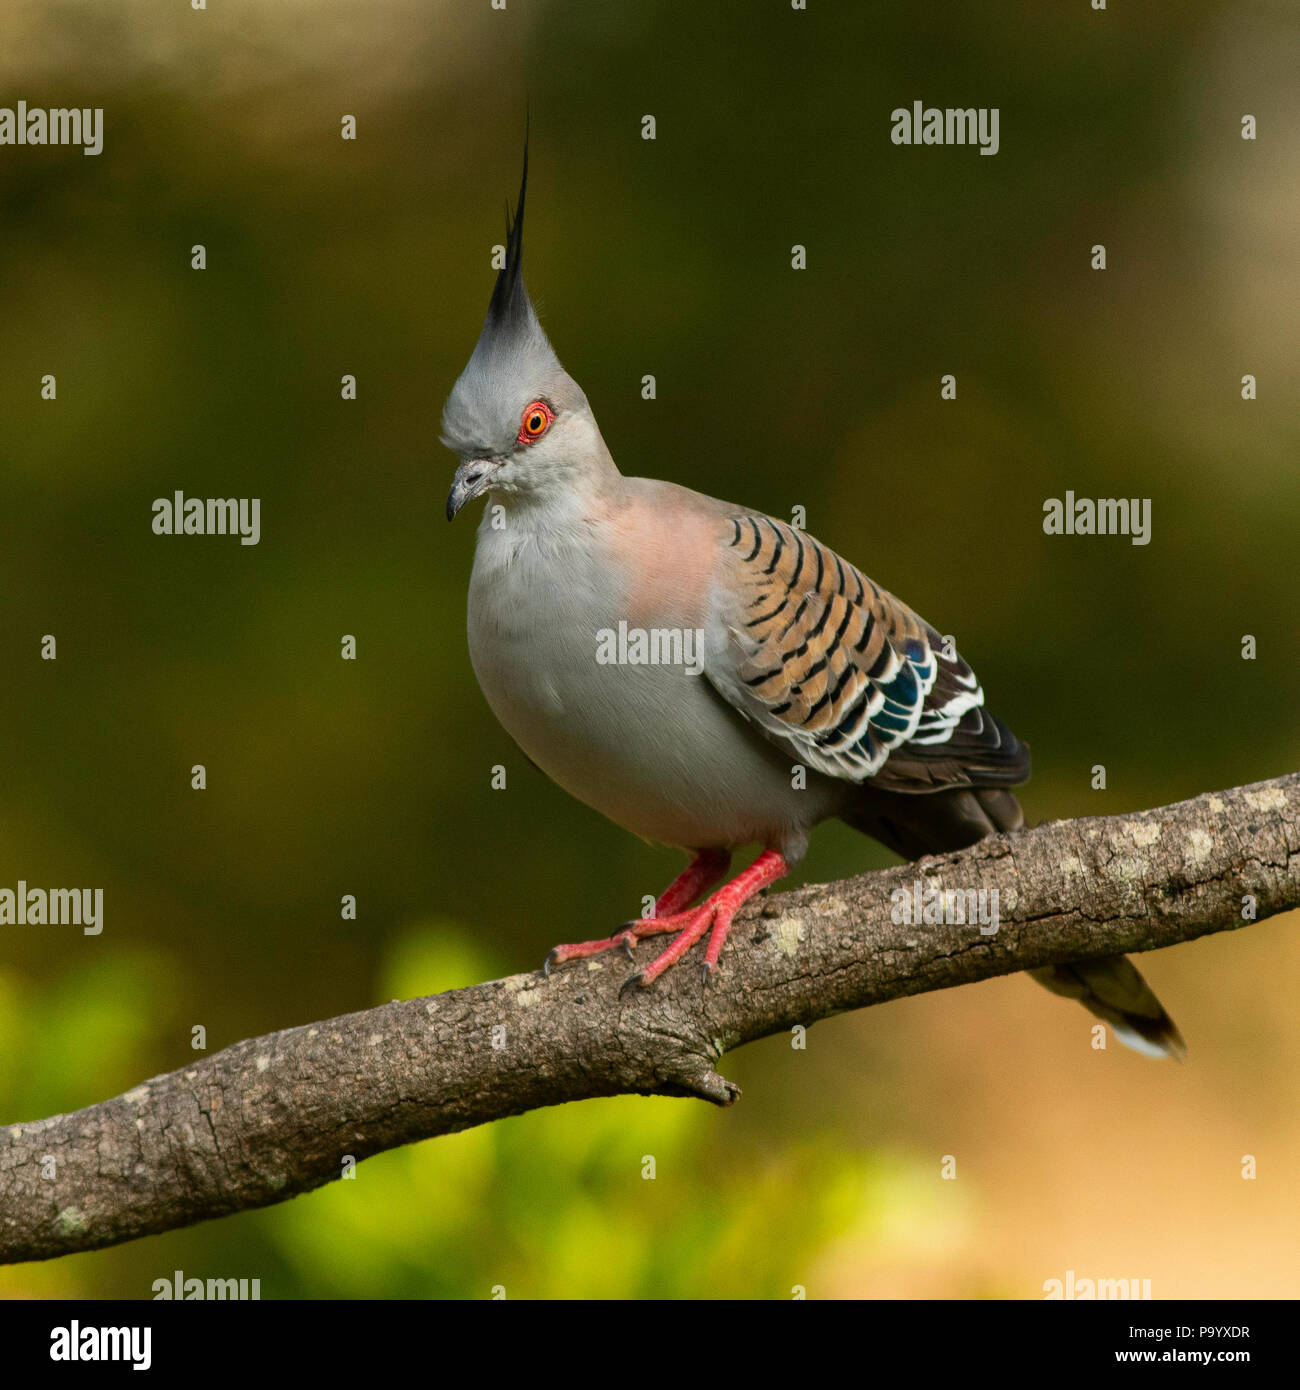 Crested Pigeon with a vivid red eye and feet on a branch with an isolated background. Stock Photo